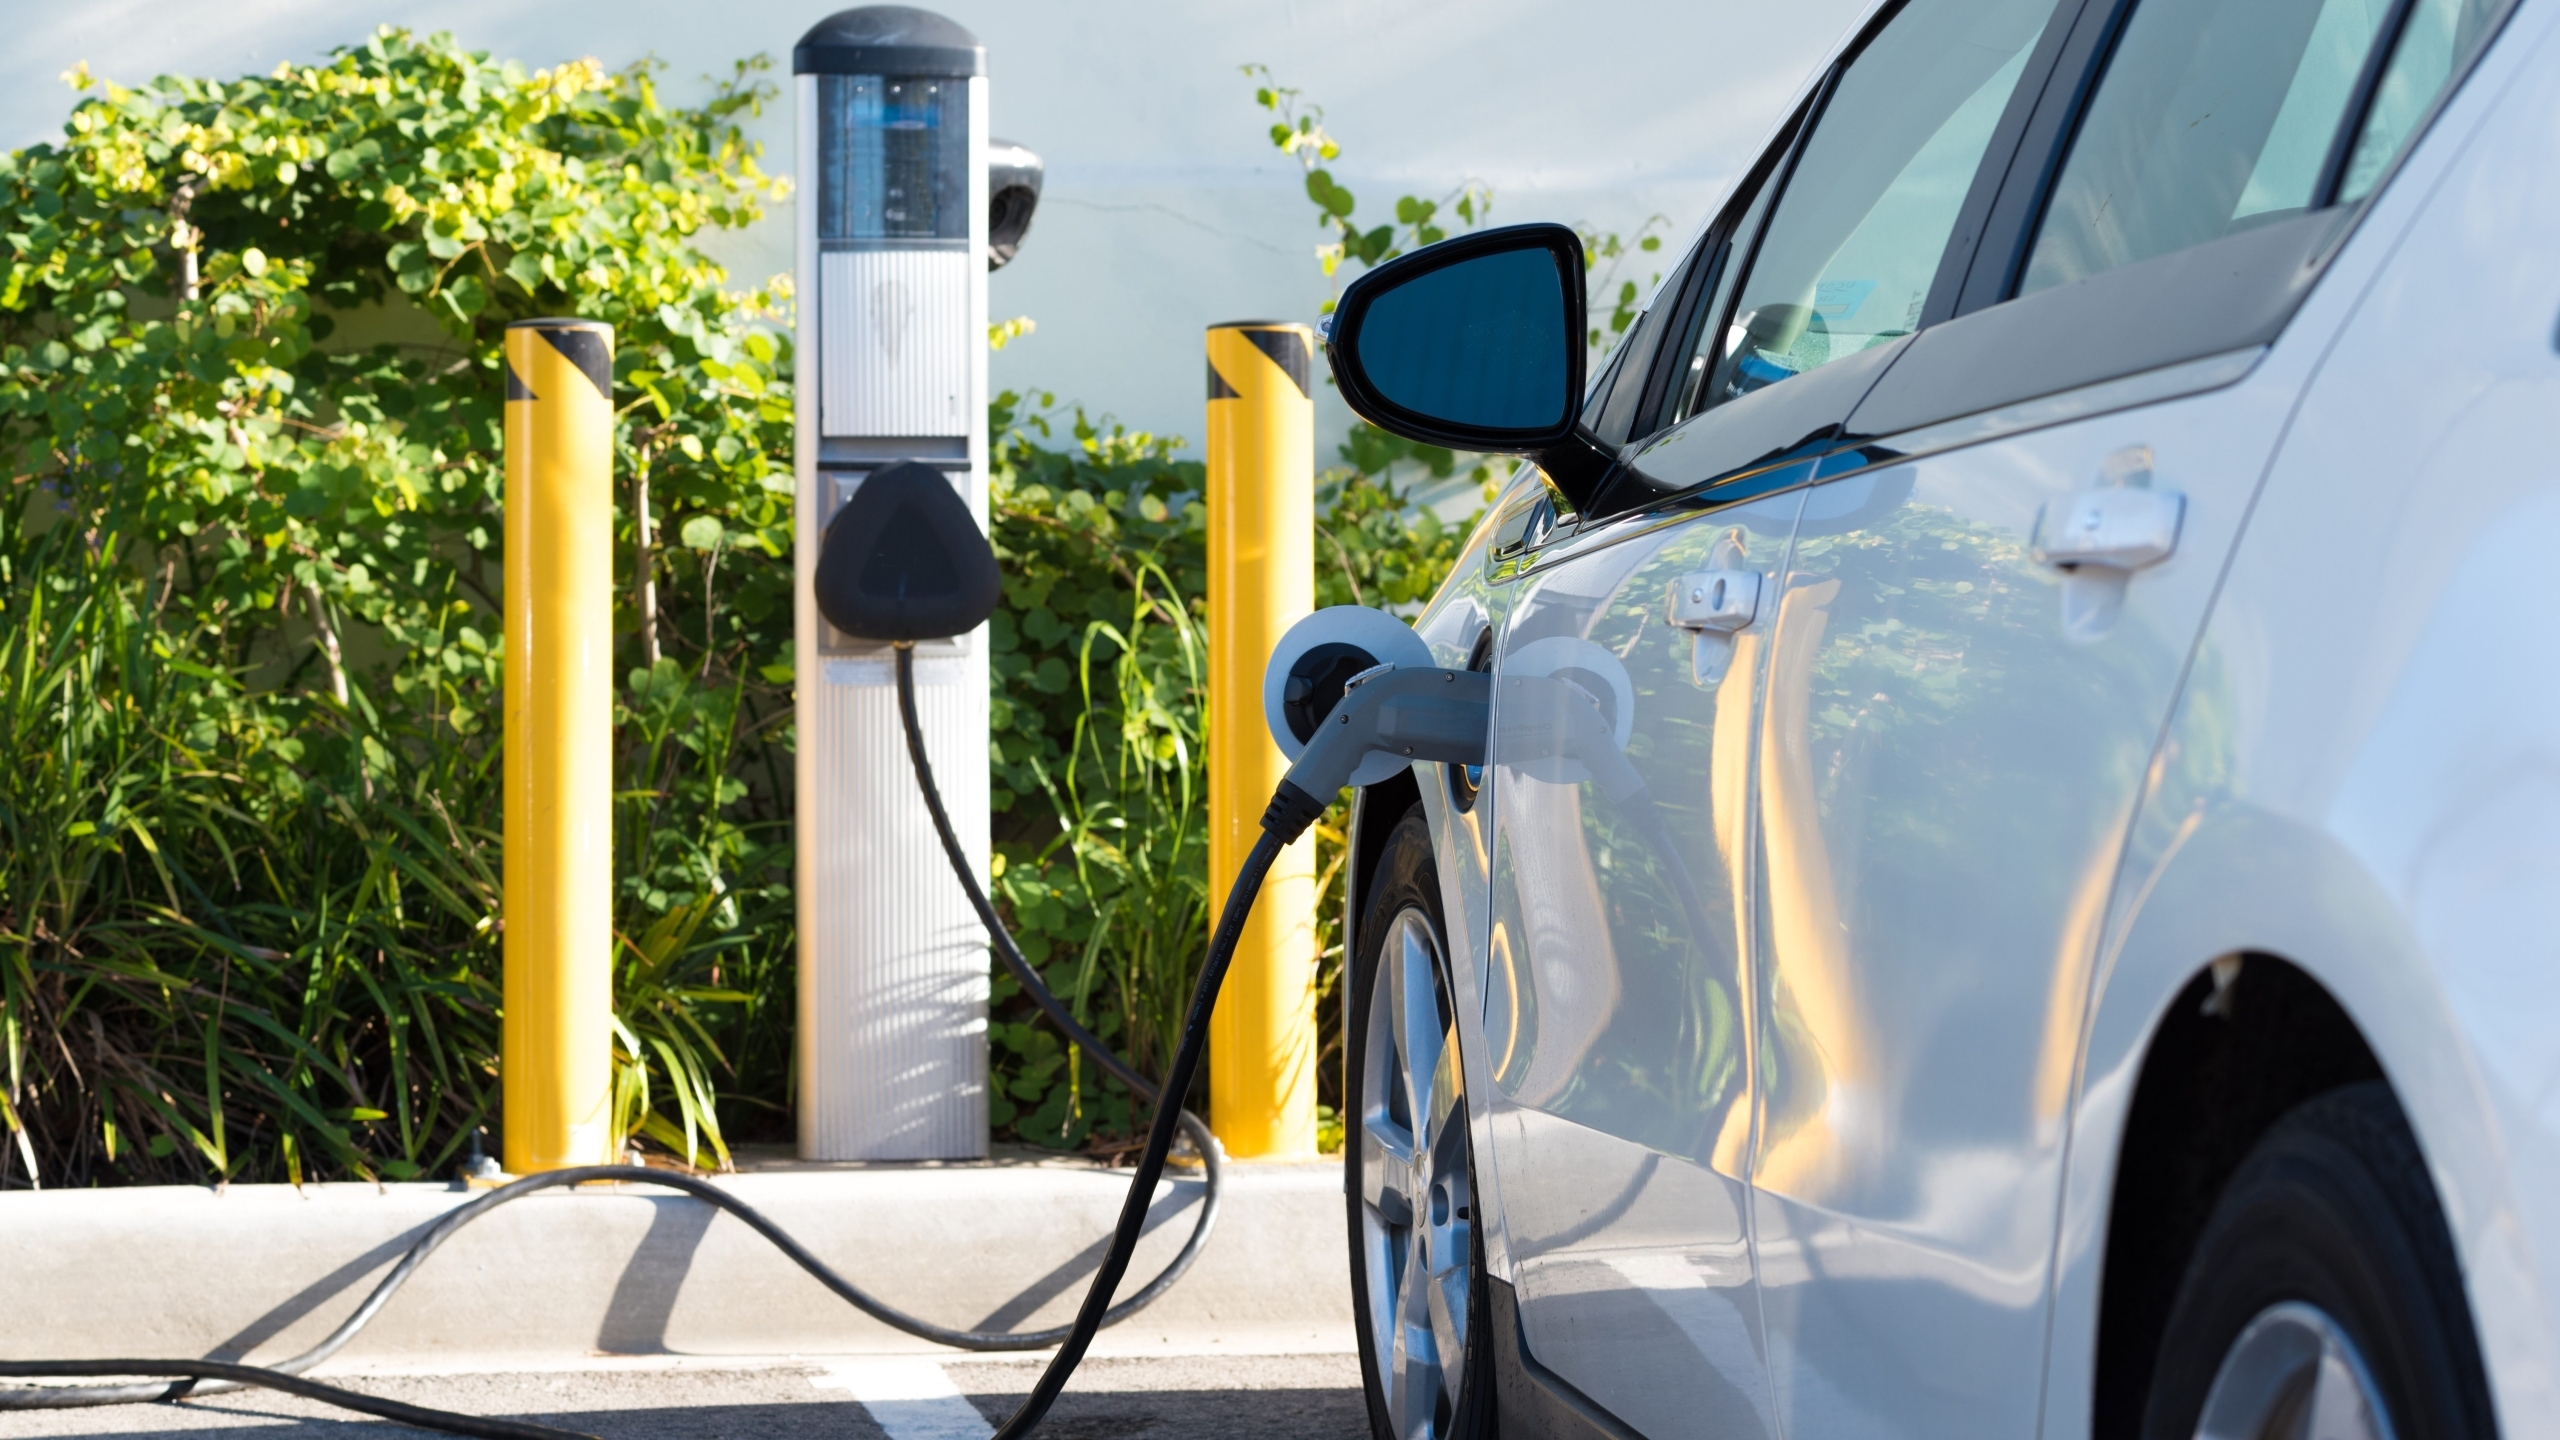 How to Install an Electric Car Charging Station